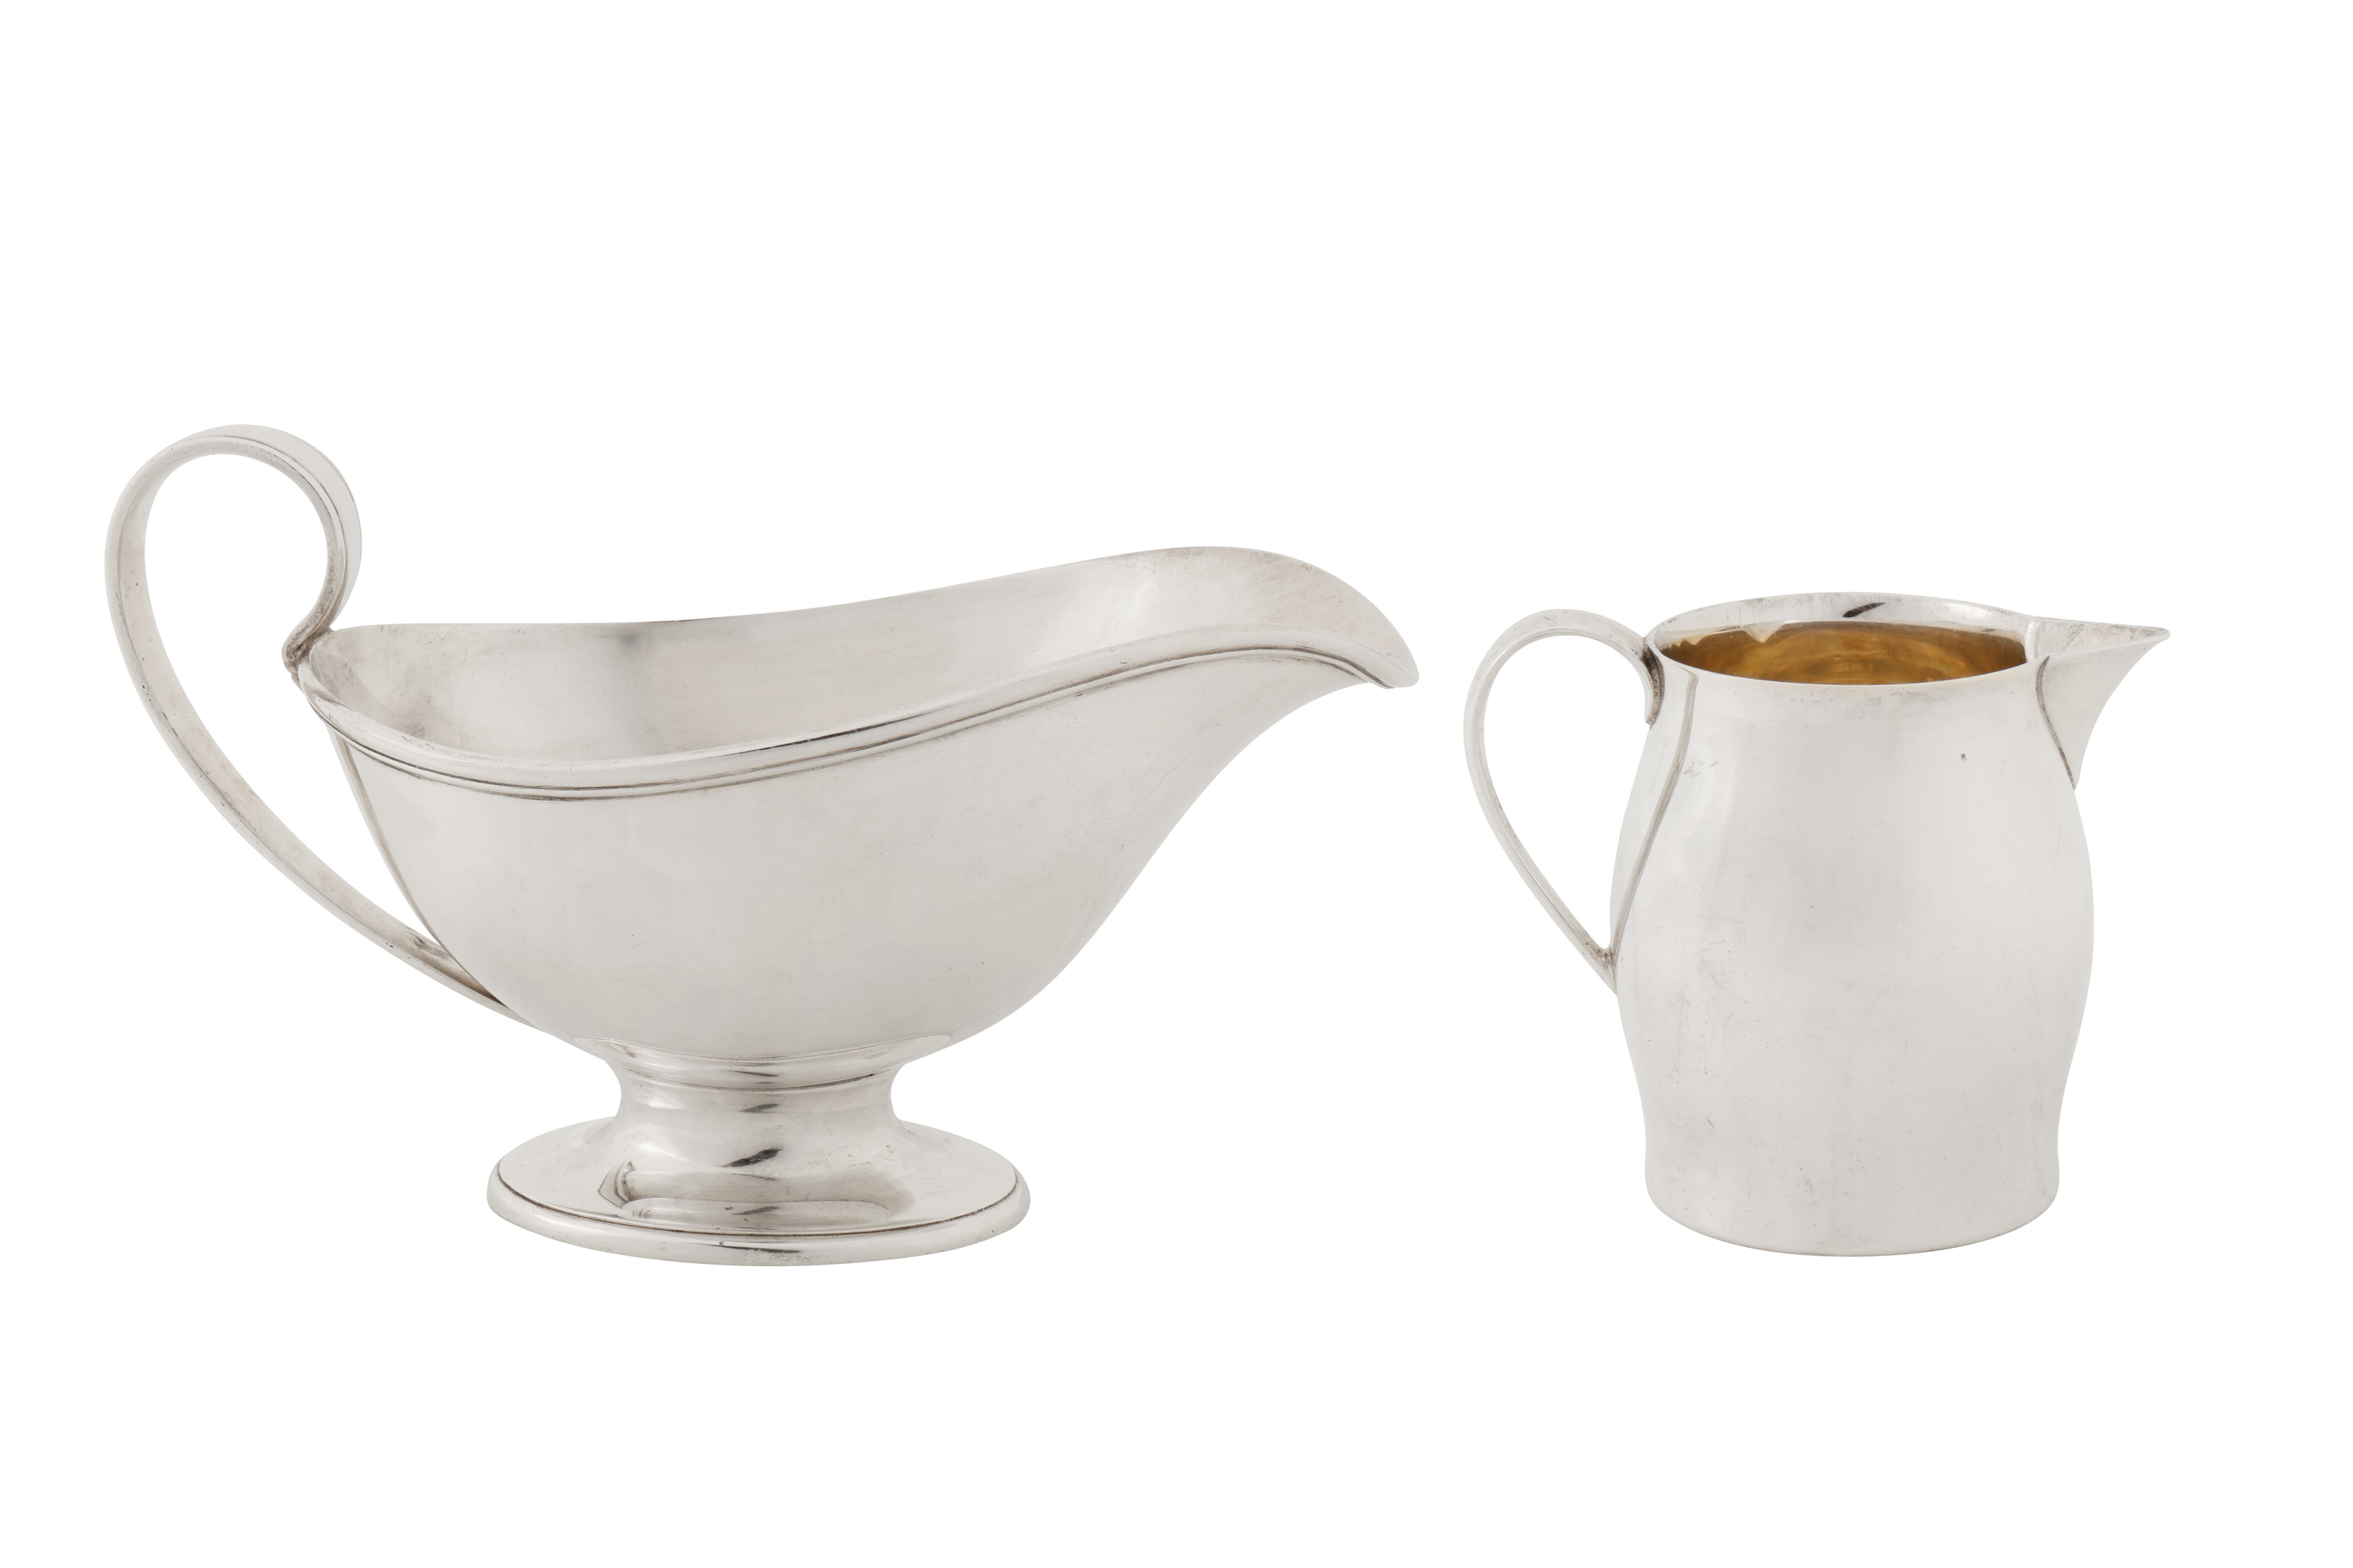 A mid-20th century American sterling silver sauce boat, New York circa 1970 by Tiffany